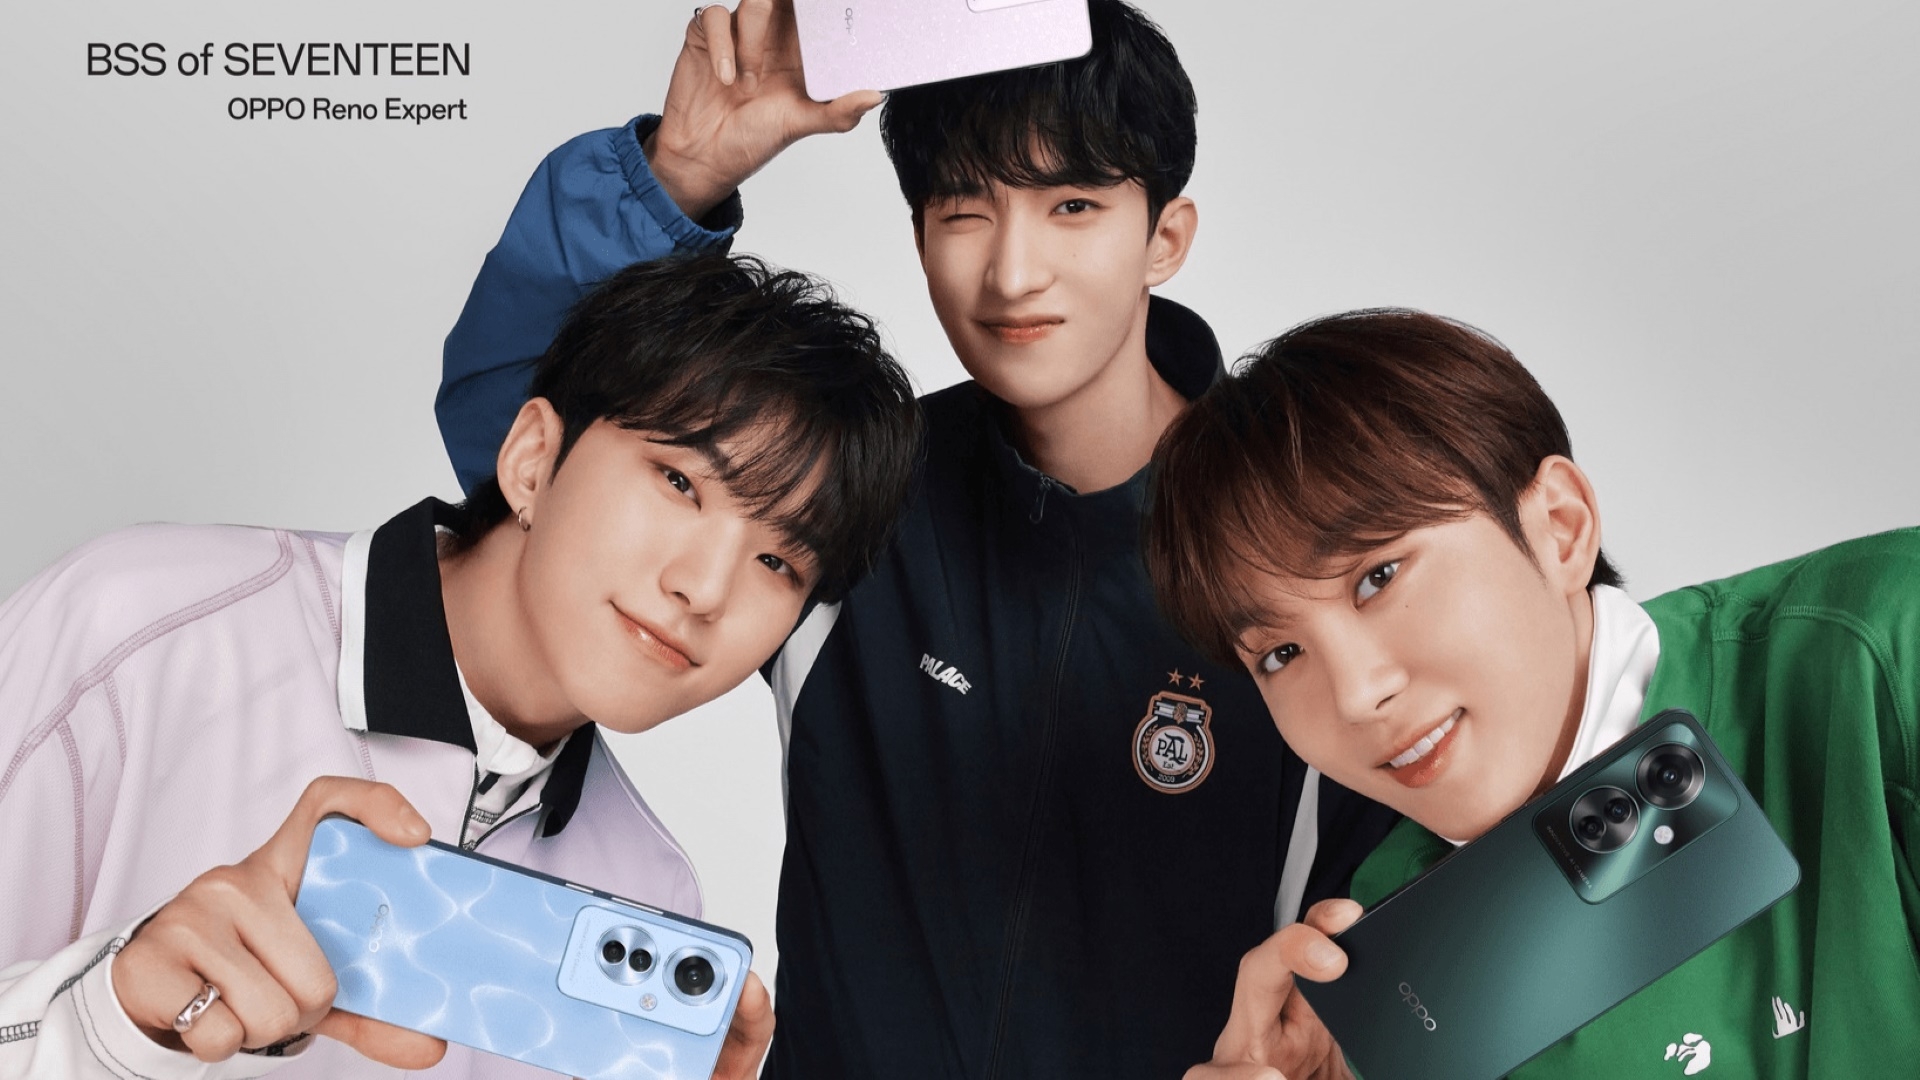 Get a free set of BSS (Seventeen) postcards from OPPO when you purchase the Reno11 F 5G!